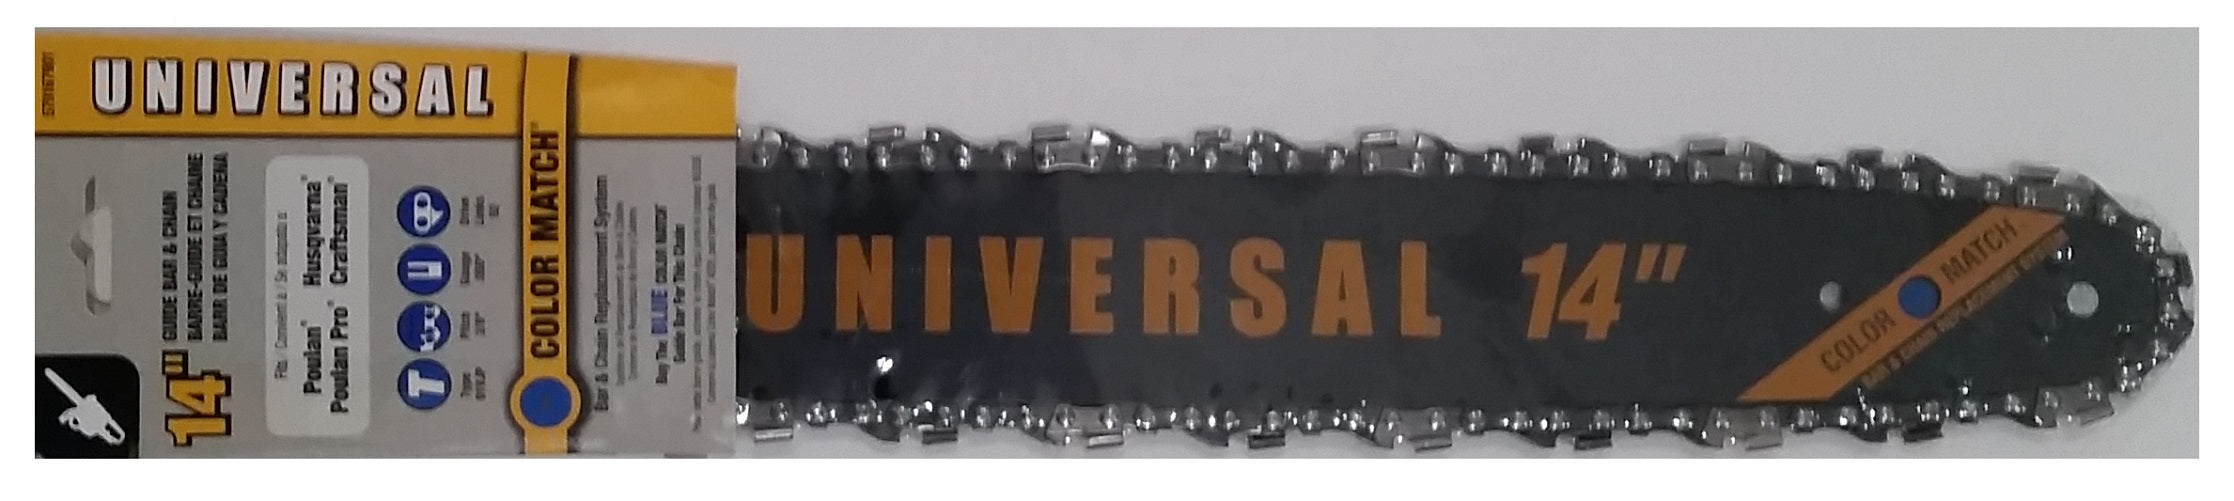 Universal 14" Replacement Guide Bar And Chain Combo